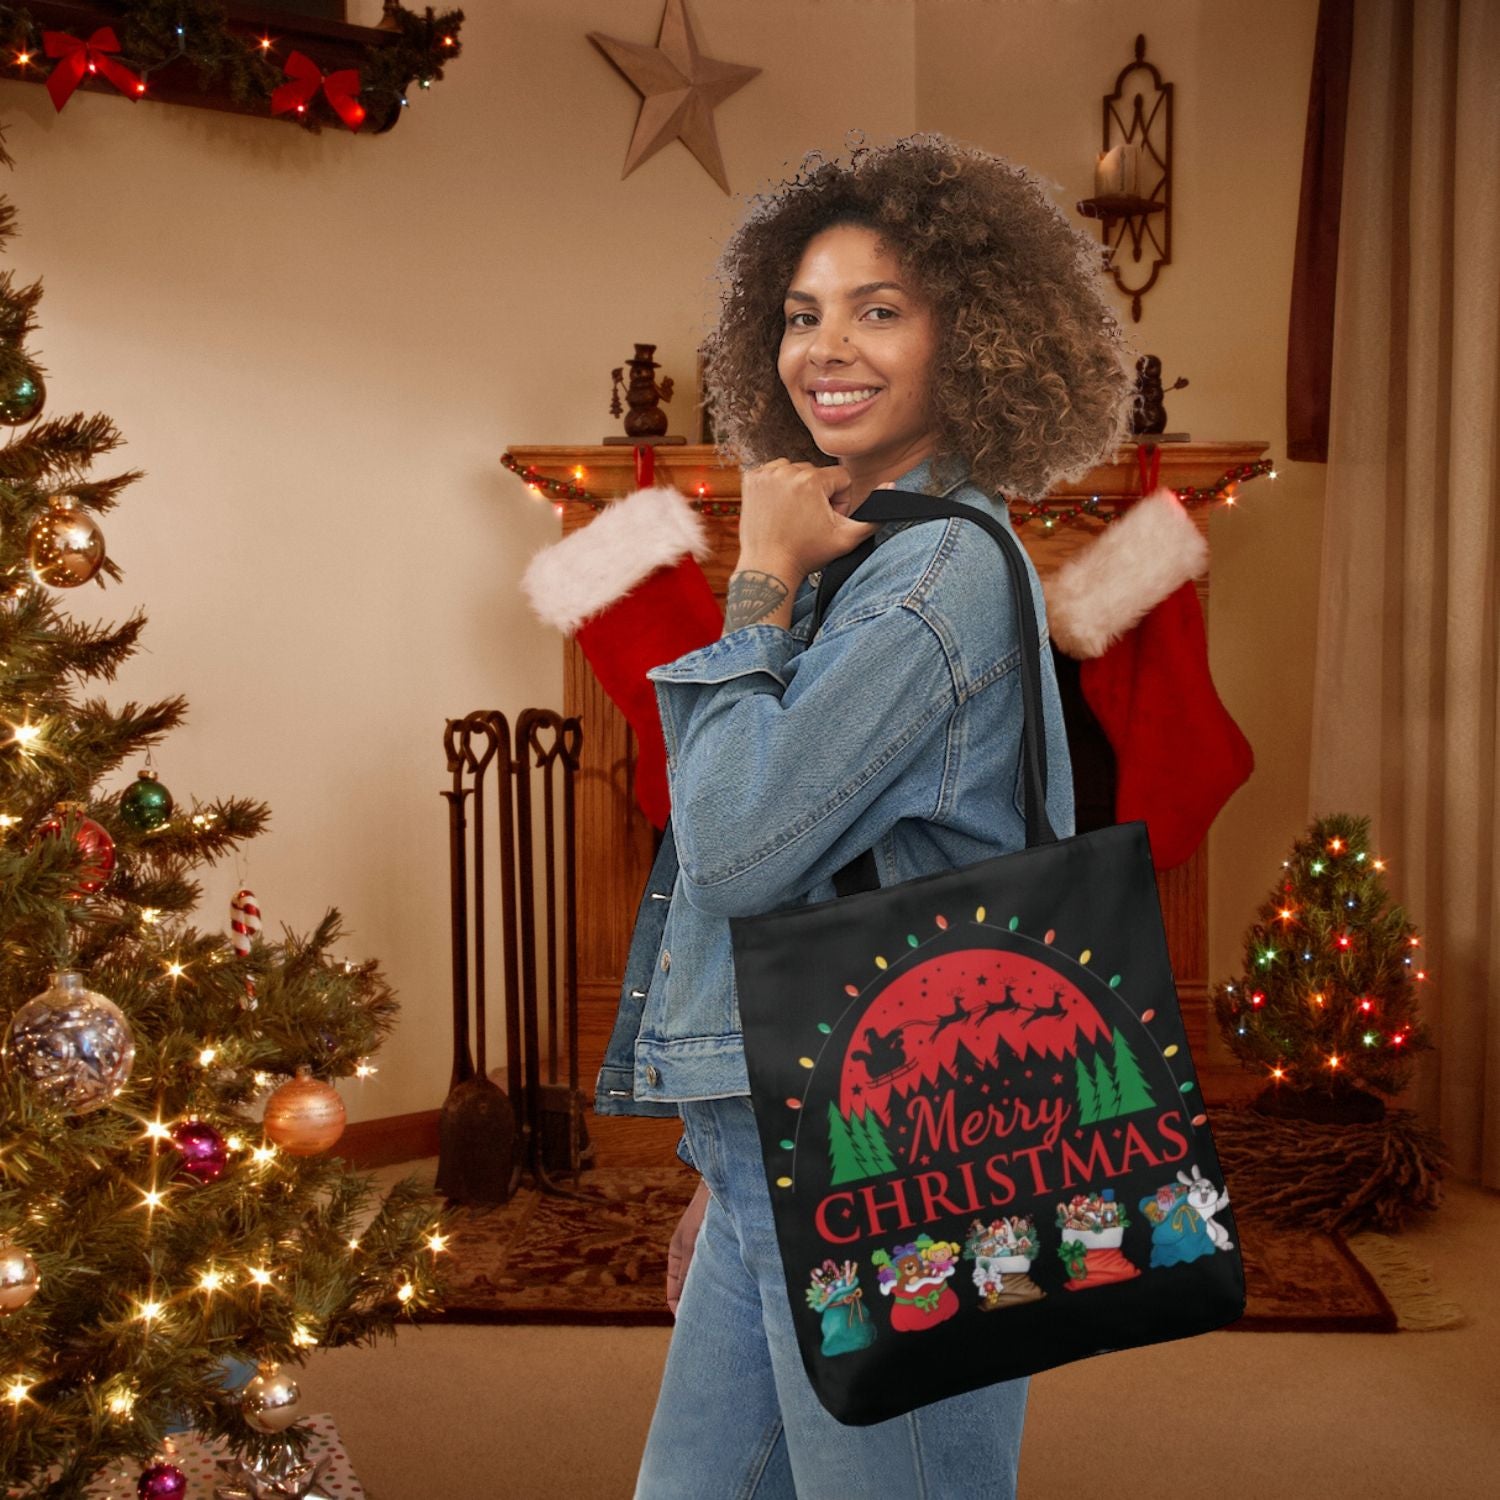 Christmas Tote Bag | Present Gift Carryall with Santa Claus and Reindeers Design Accessories   